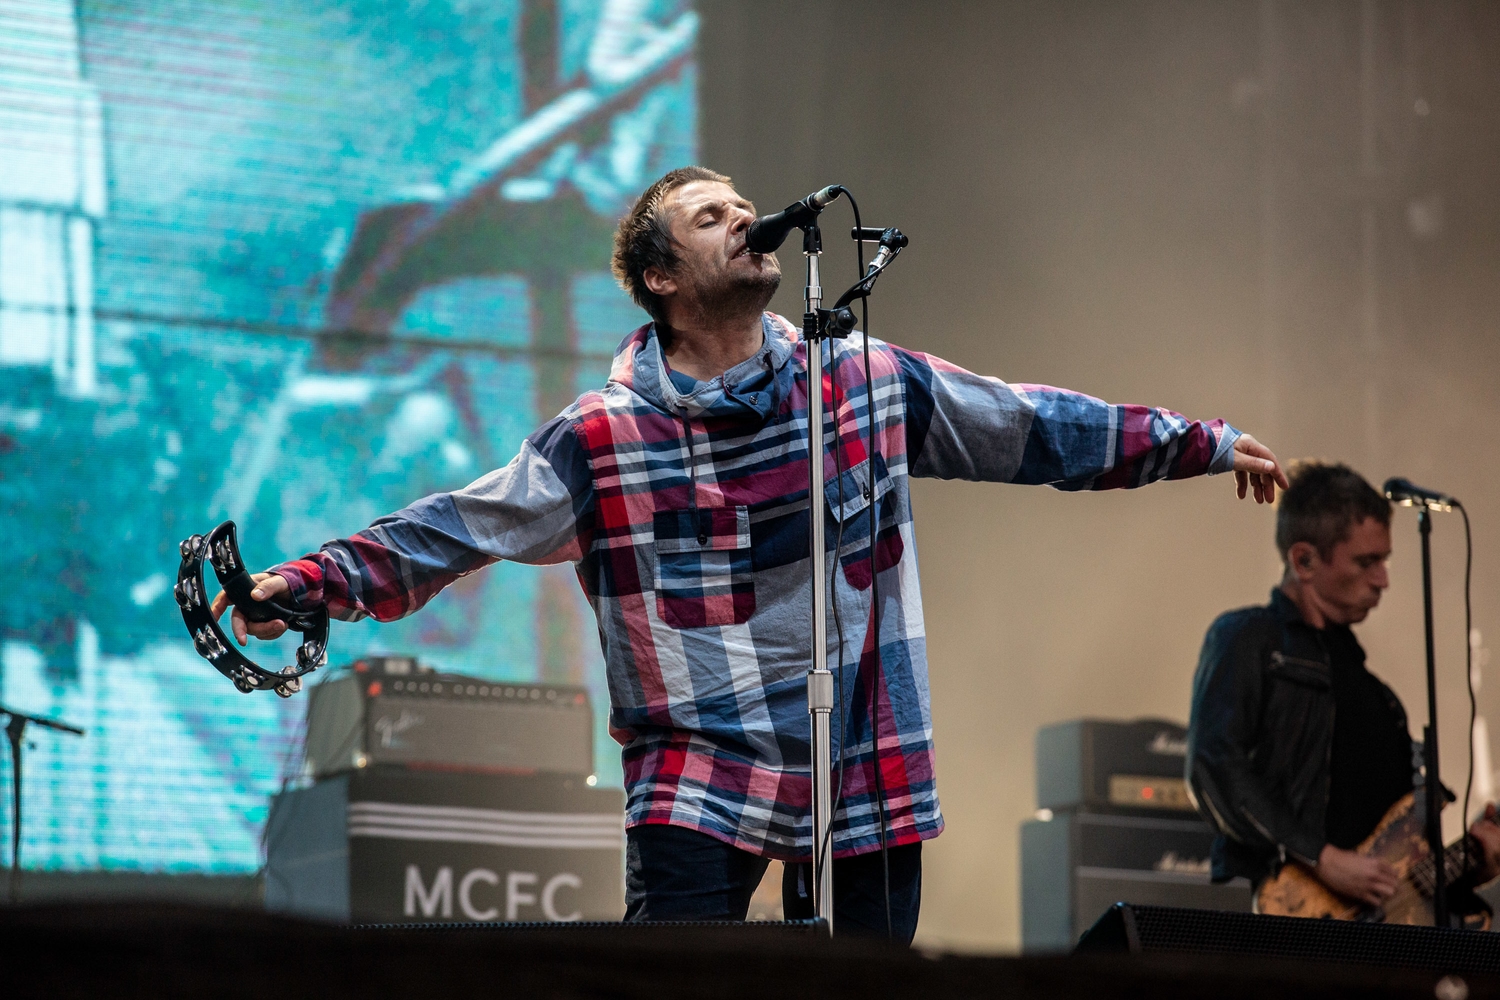 Liam Gallagher reveals new song 'All You're Dreaming Of'